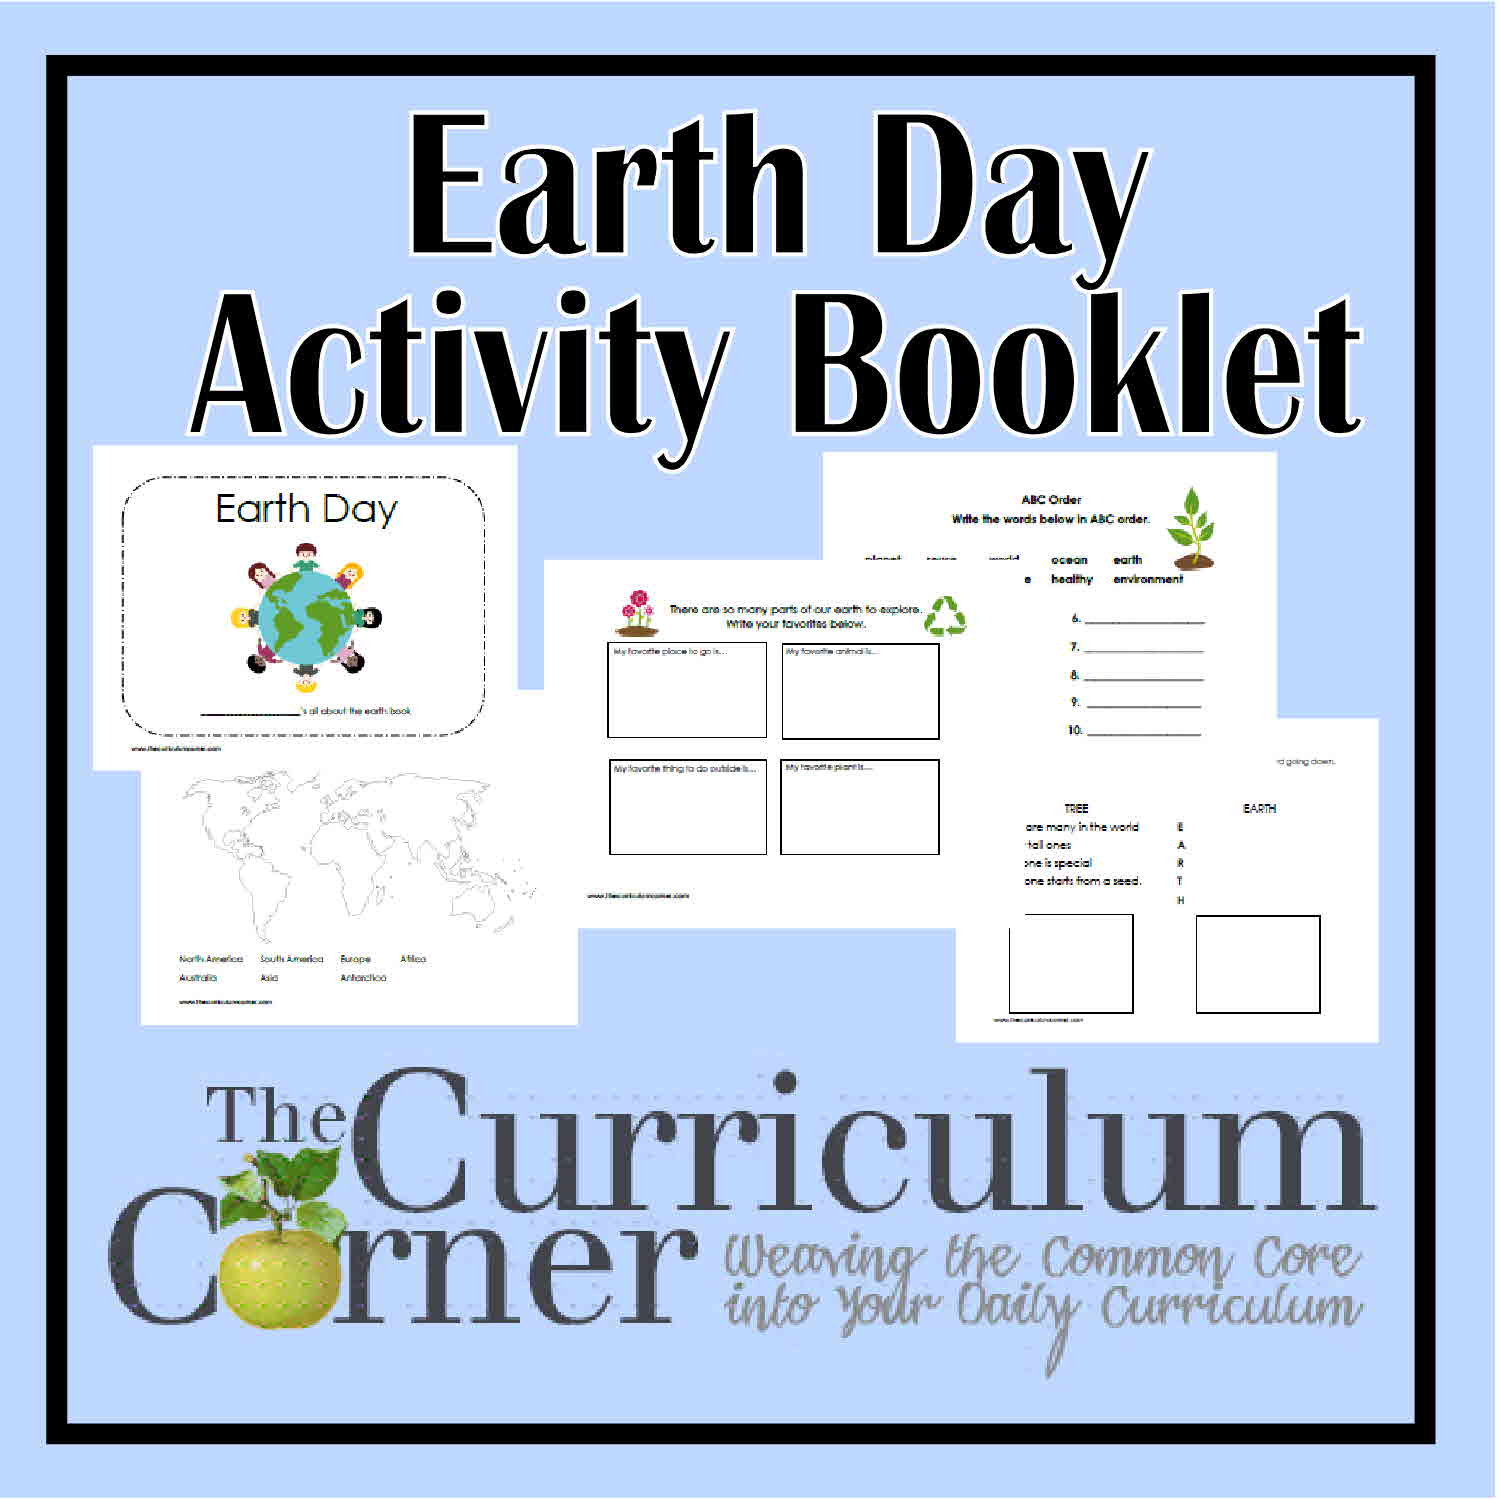 Earth Day Activity Booklet